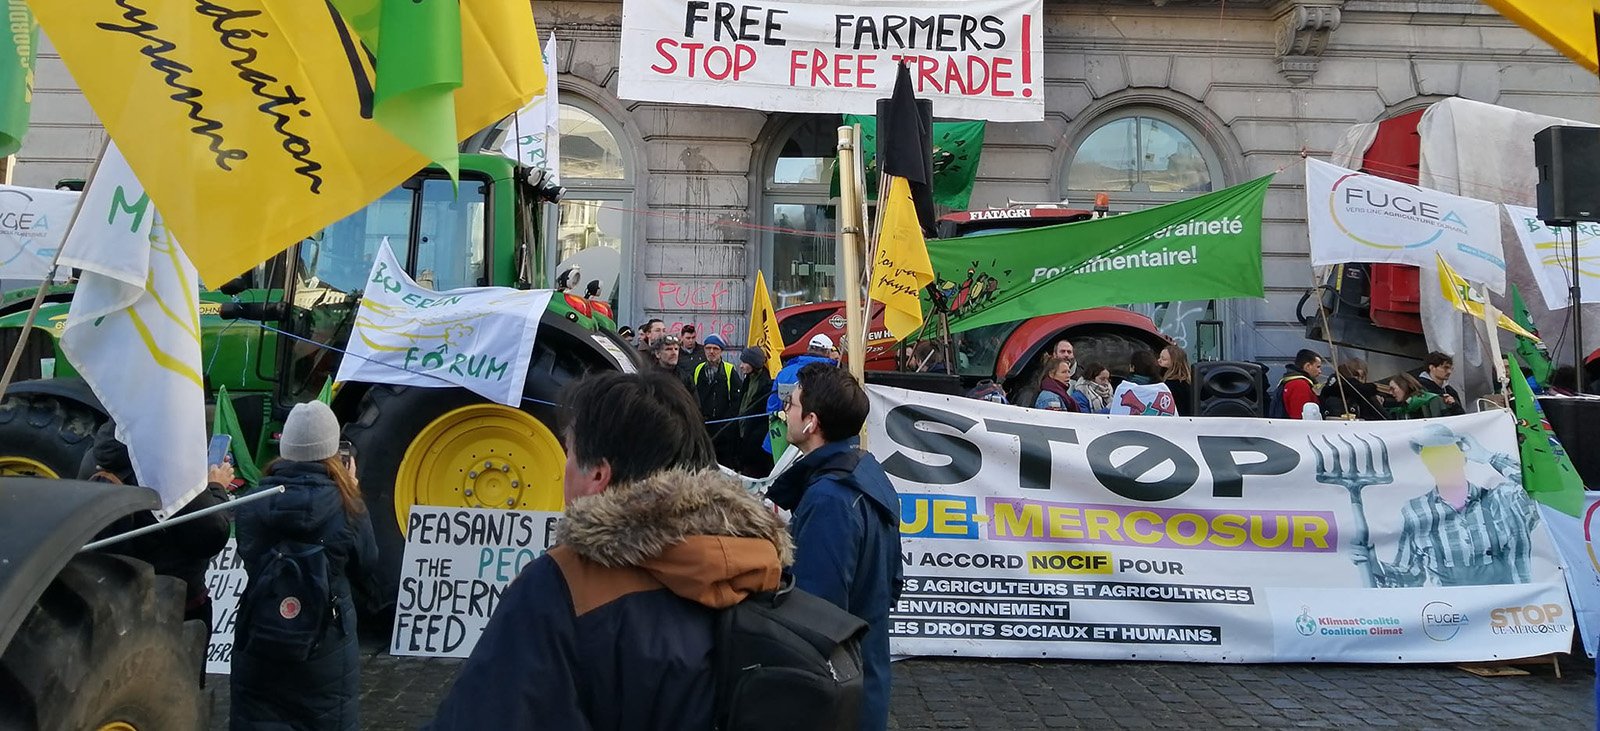 Farmers protests in Brussels